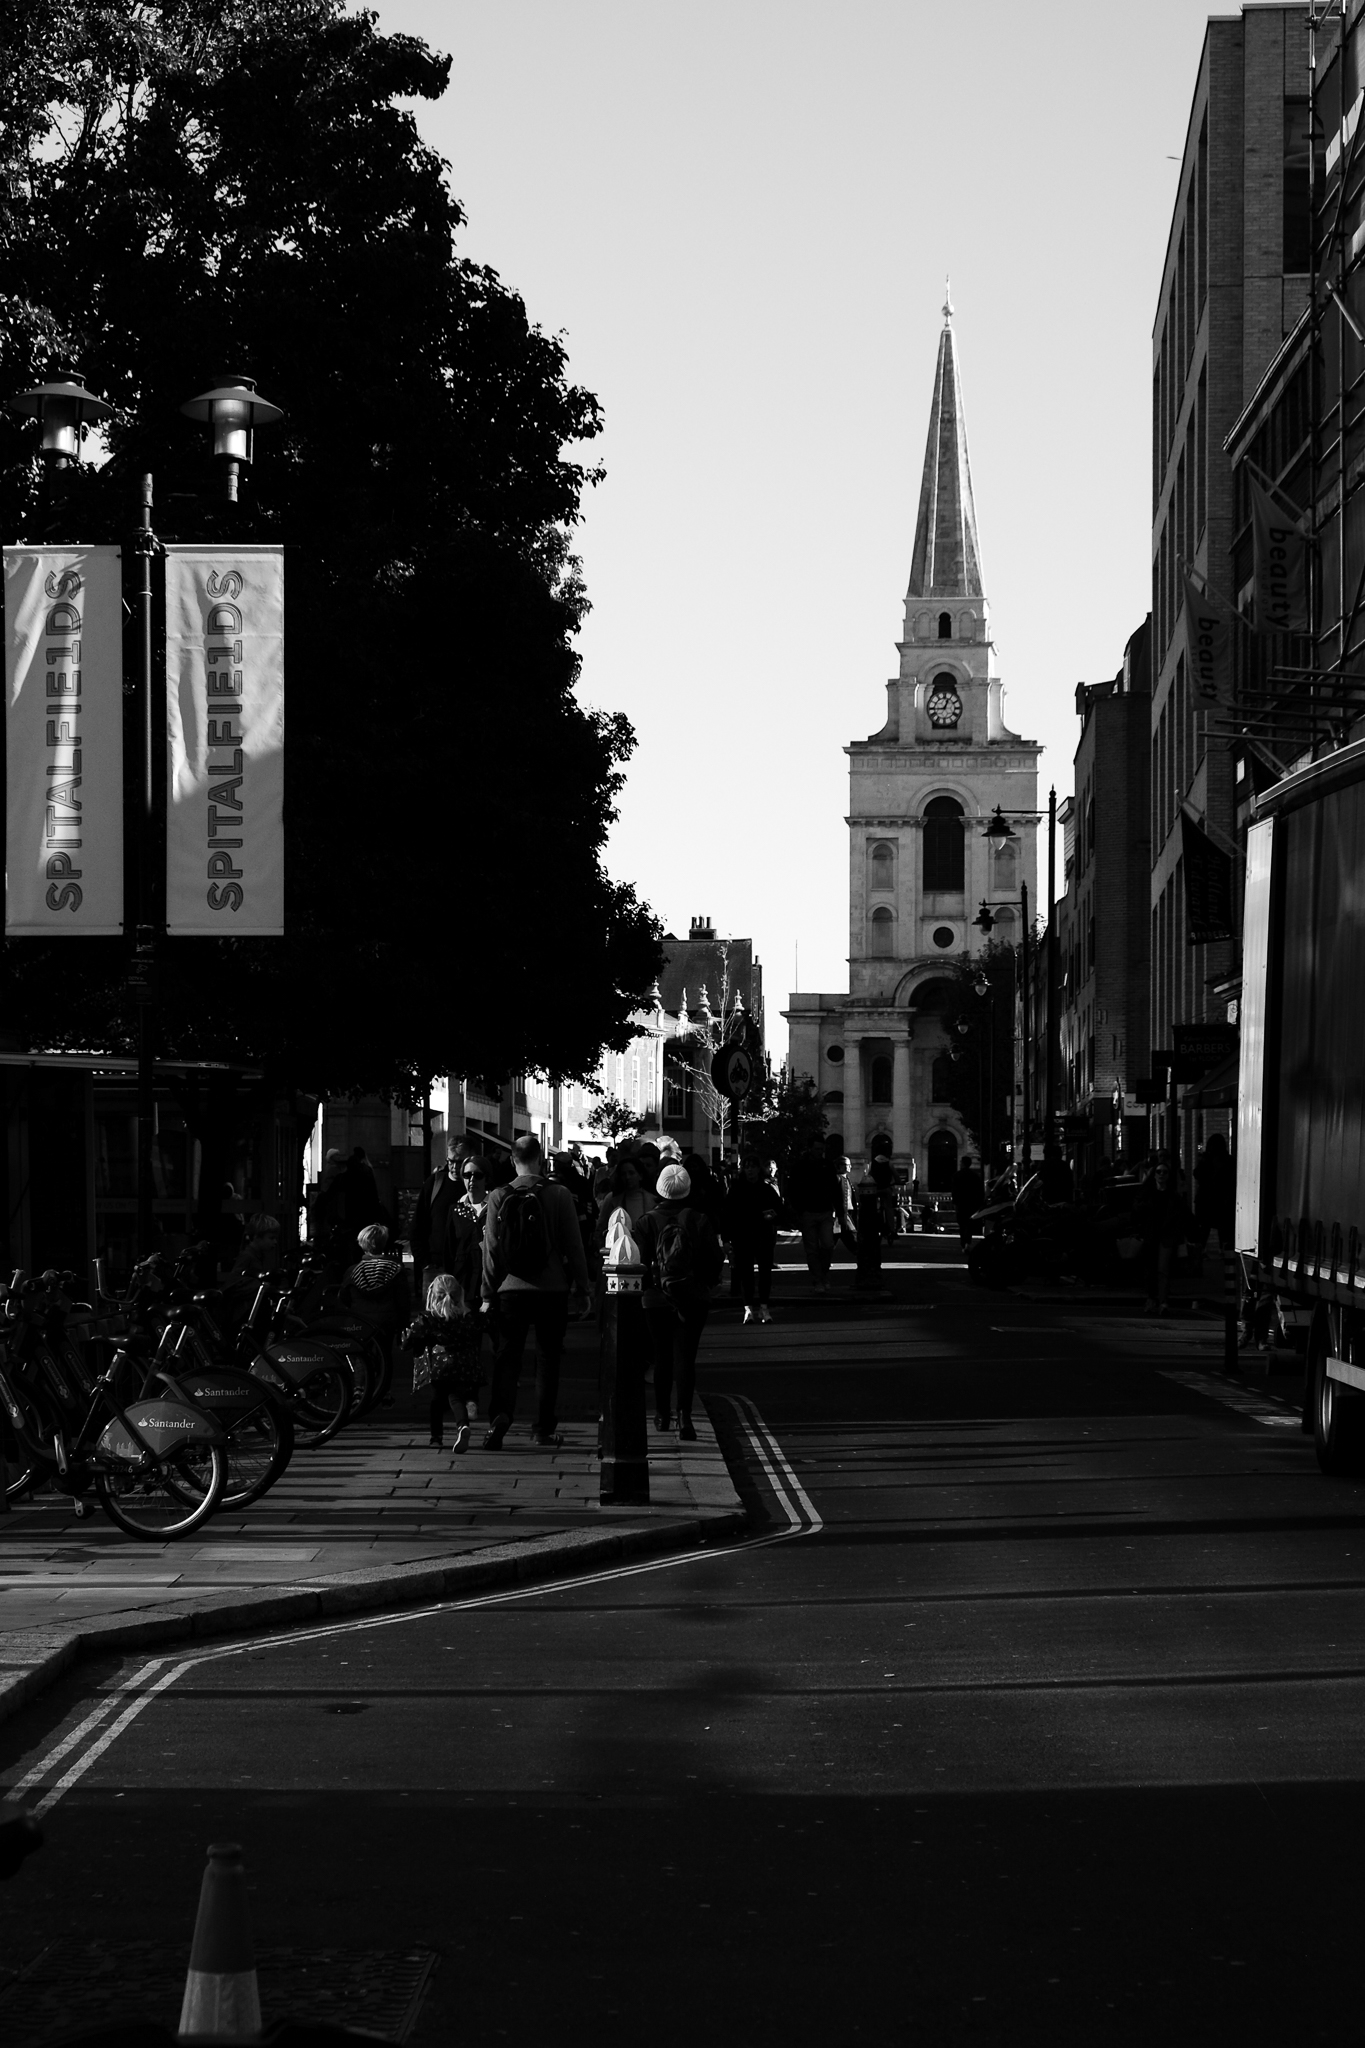 Black and white image down the street of the entrance to Spitalfields market with the church tower at the end of the road